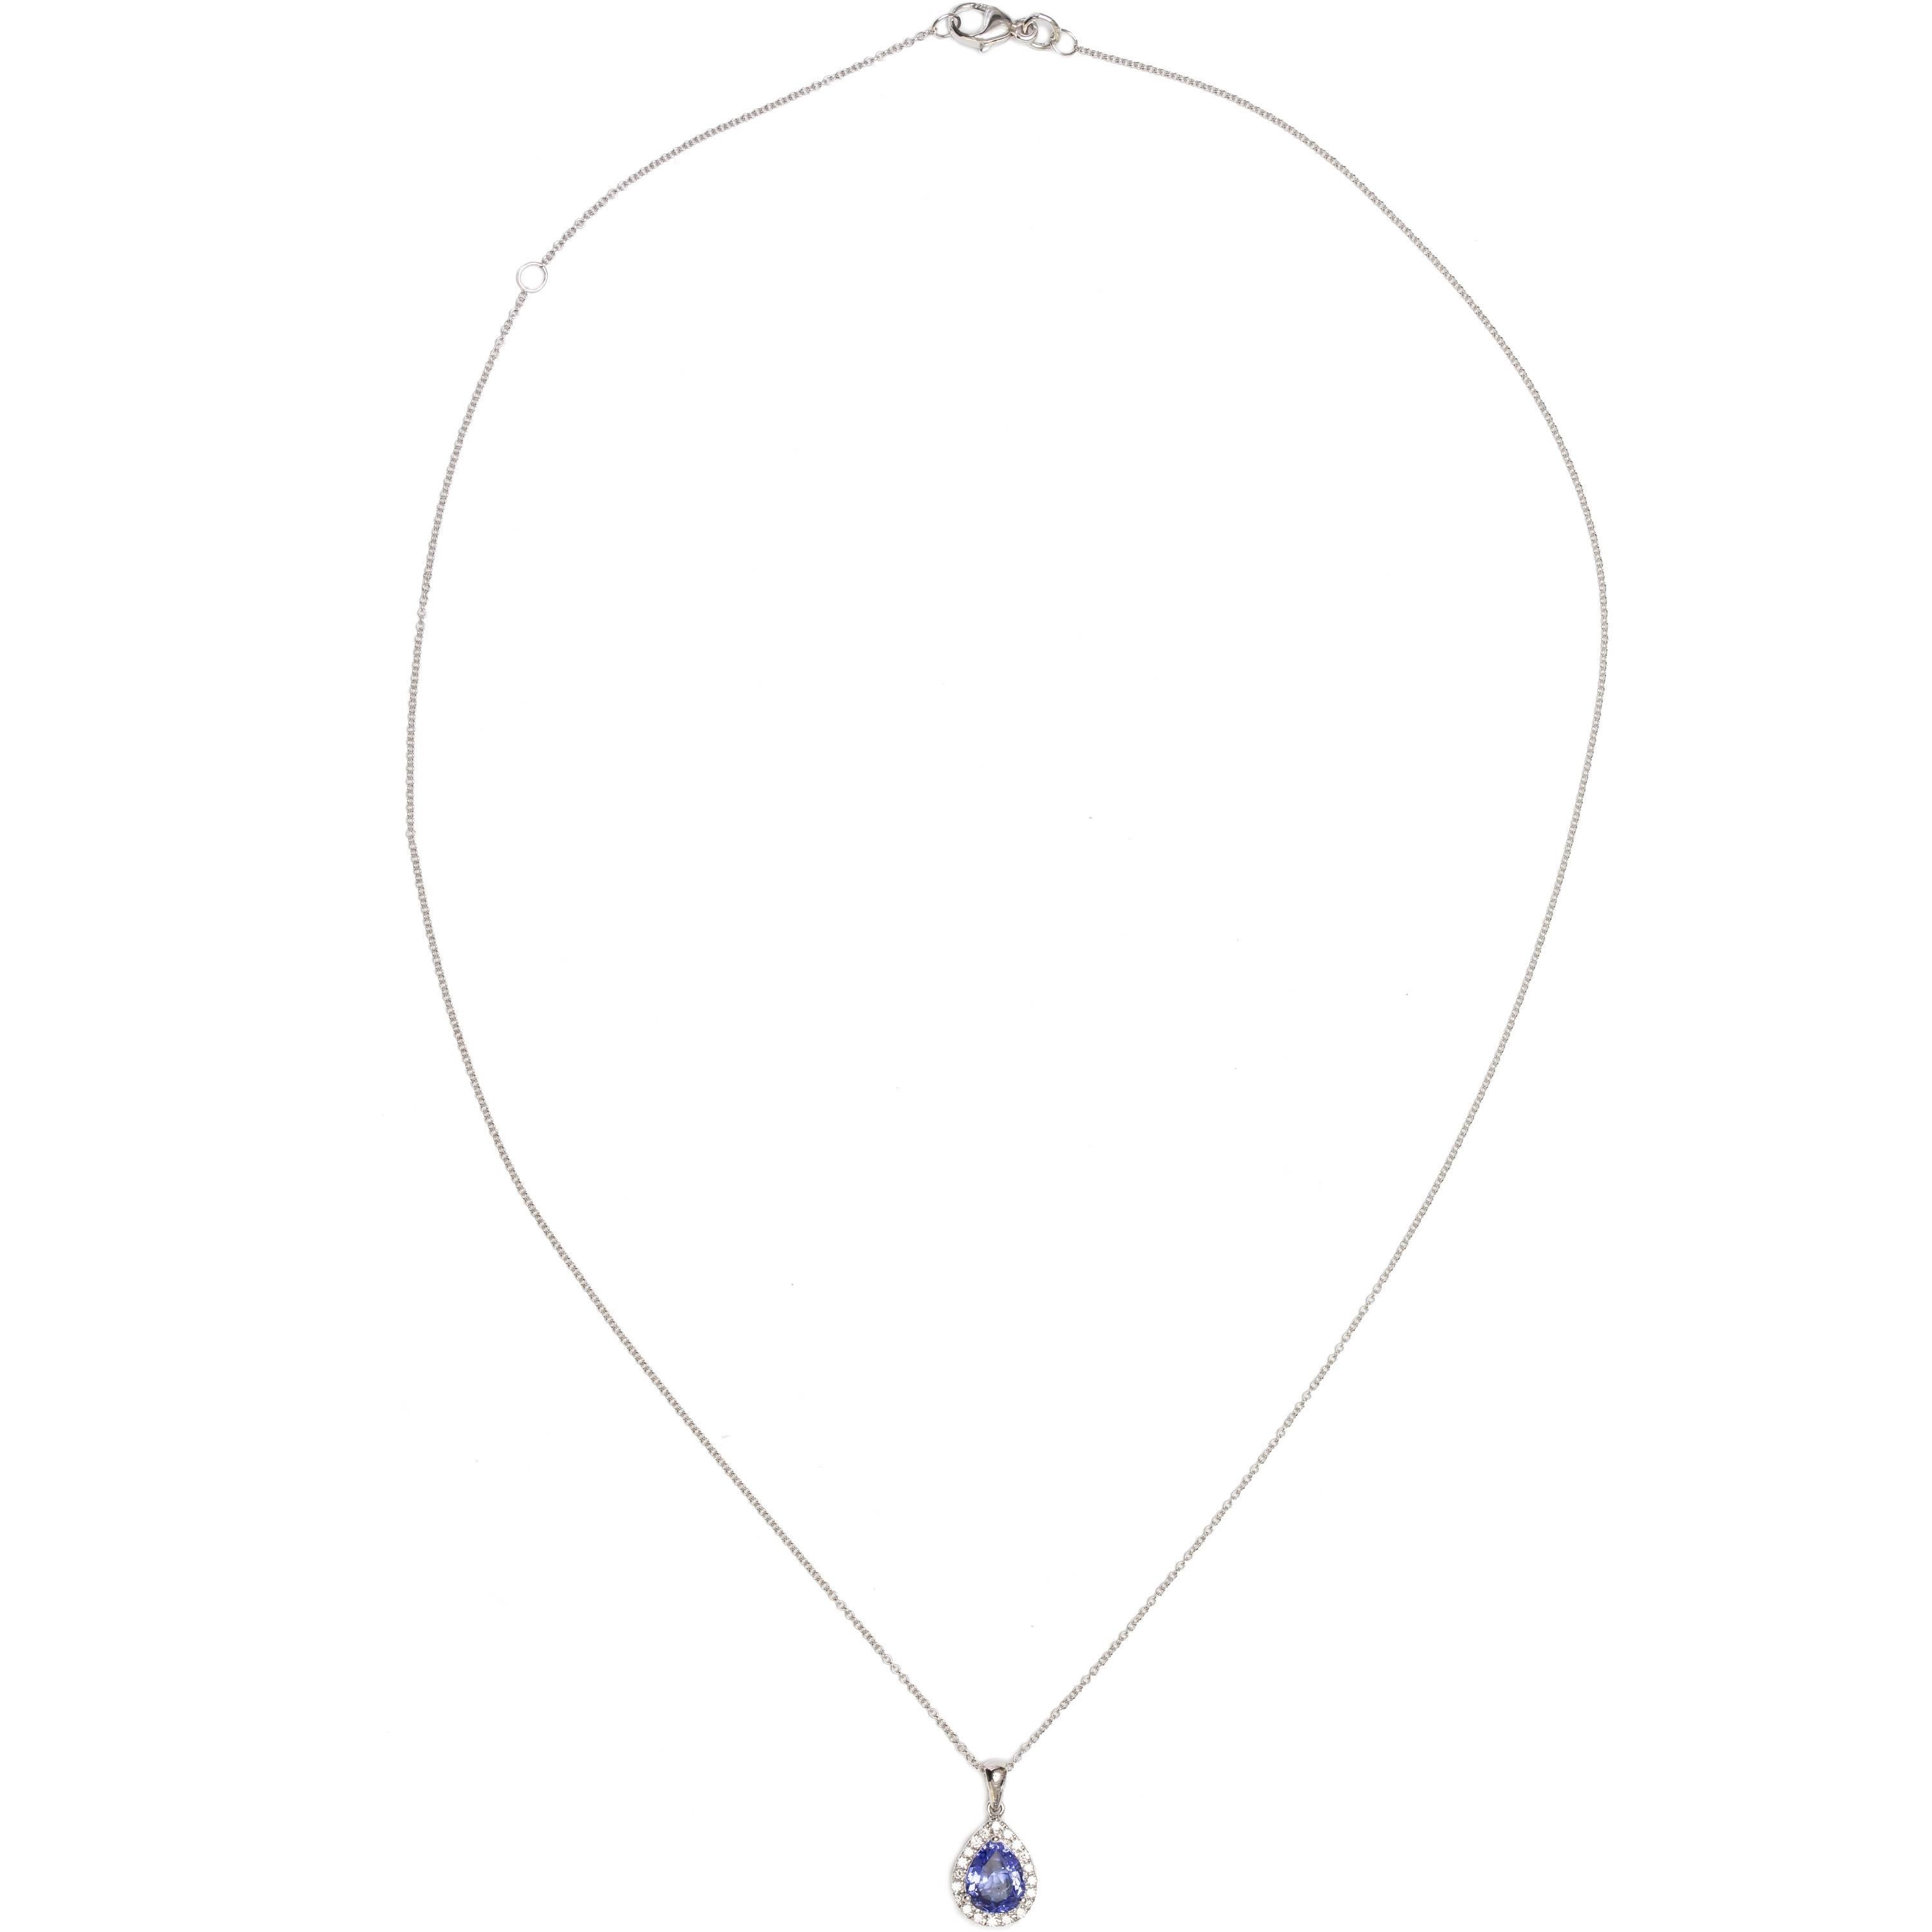 Bespoke Pear Shape Pendant with intense purple and 1.26 Carat  Blue Tanzanite, centre with halo set design sparkling natural white diamonds colour G / H clarity VS /SI Round Brilliant Cut.
This modern interpretation of a classic look is brought to